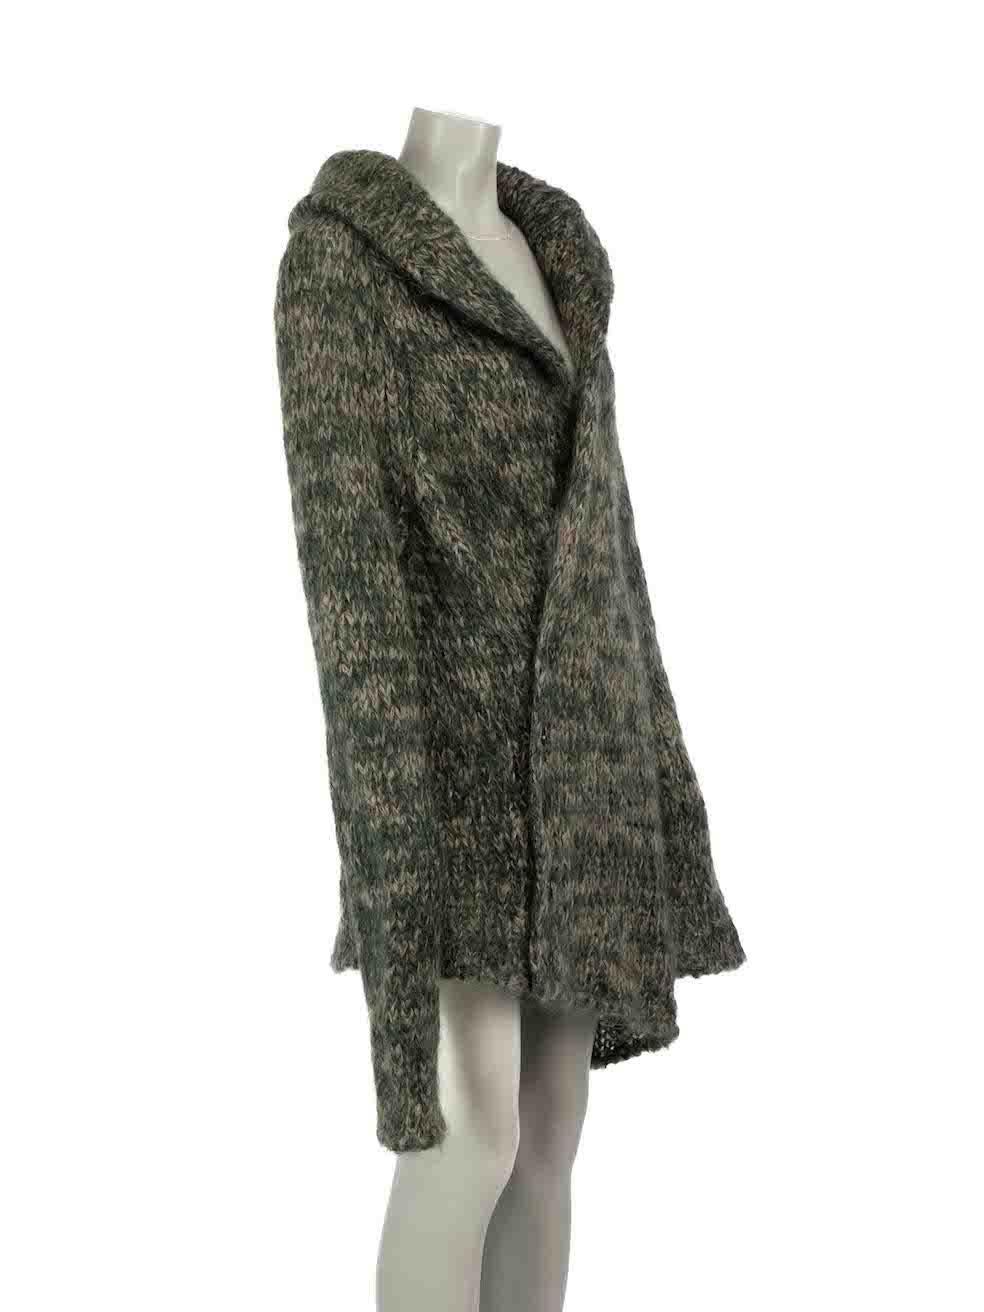 CONDITION is Very good. Hardly any visible wear to cardigan is evident on this used Alexander McQueen designer resale item.
 
Details
Green
Mohair
Cardigan
Marl knitted
Oversized collar
Front wrap accent
Front button up closure
 
Made in Italy
